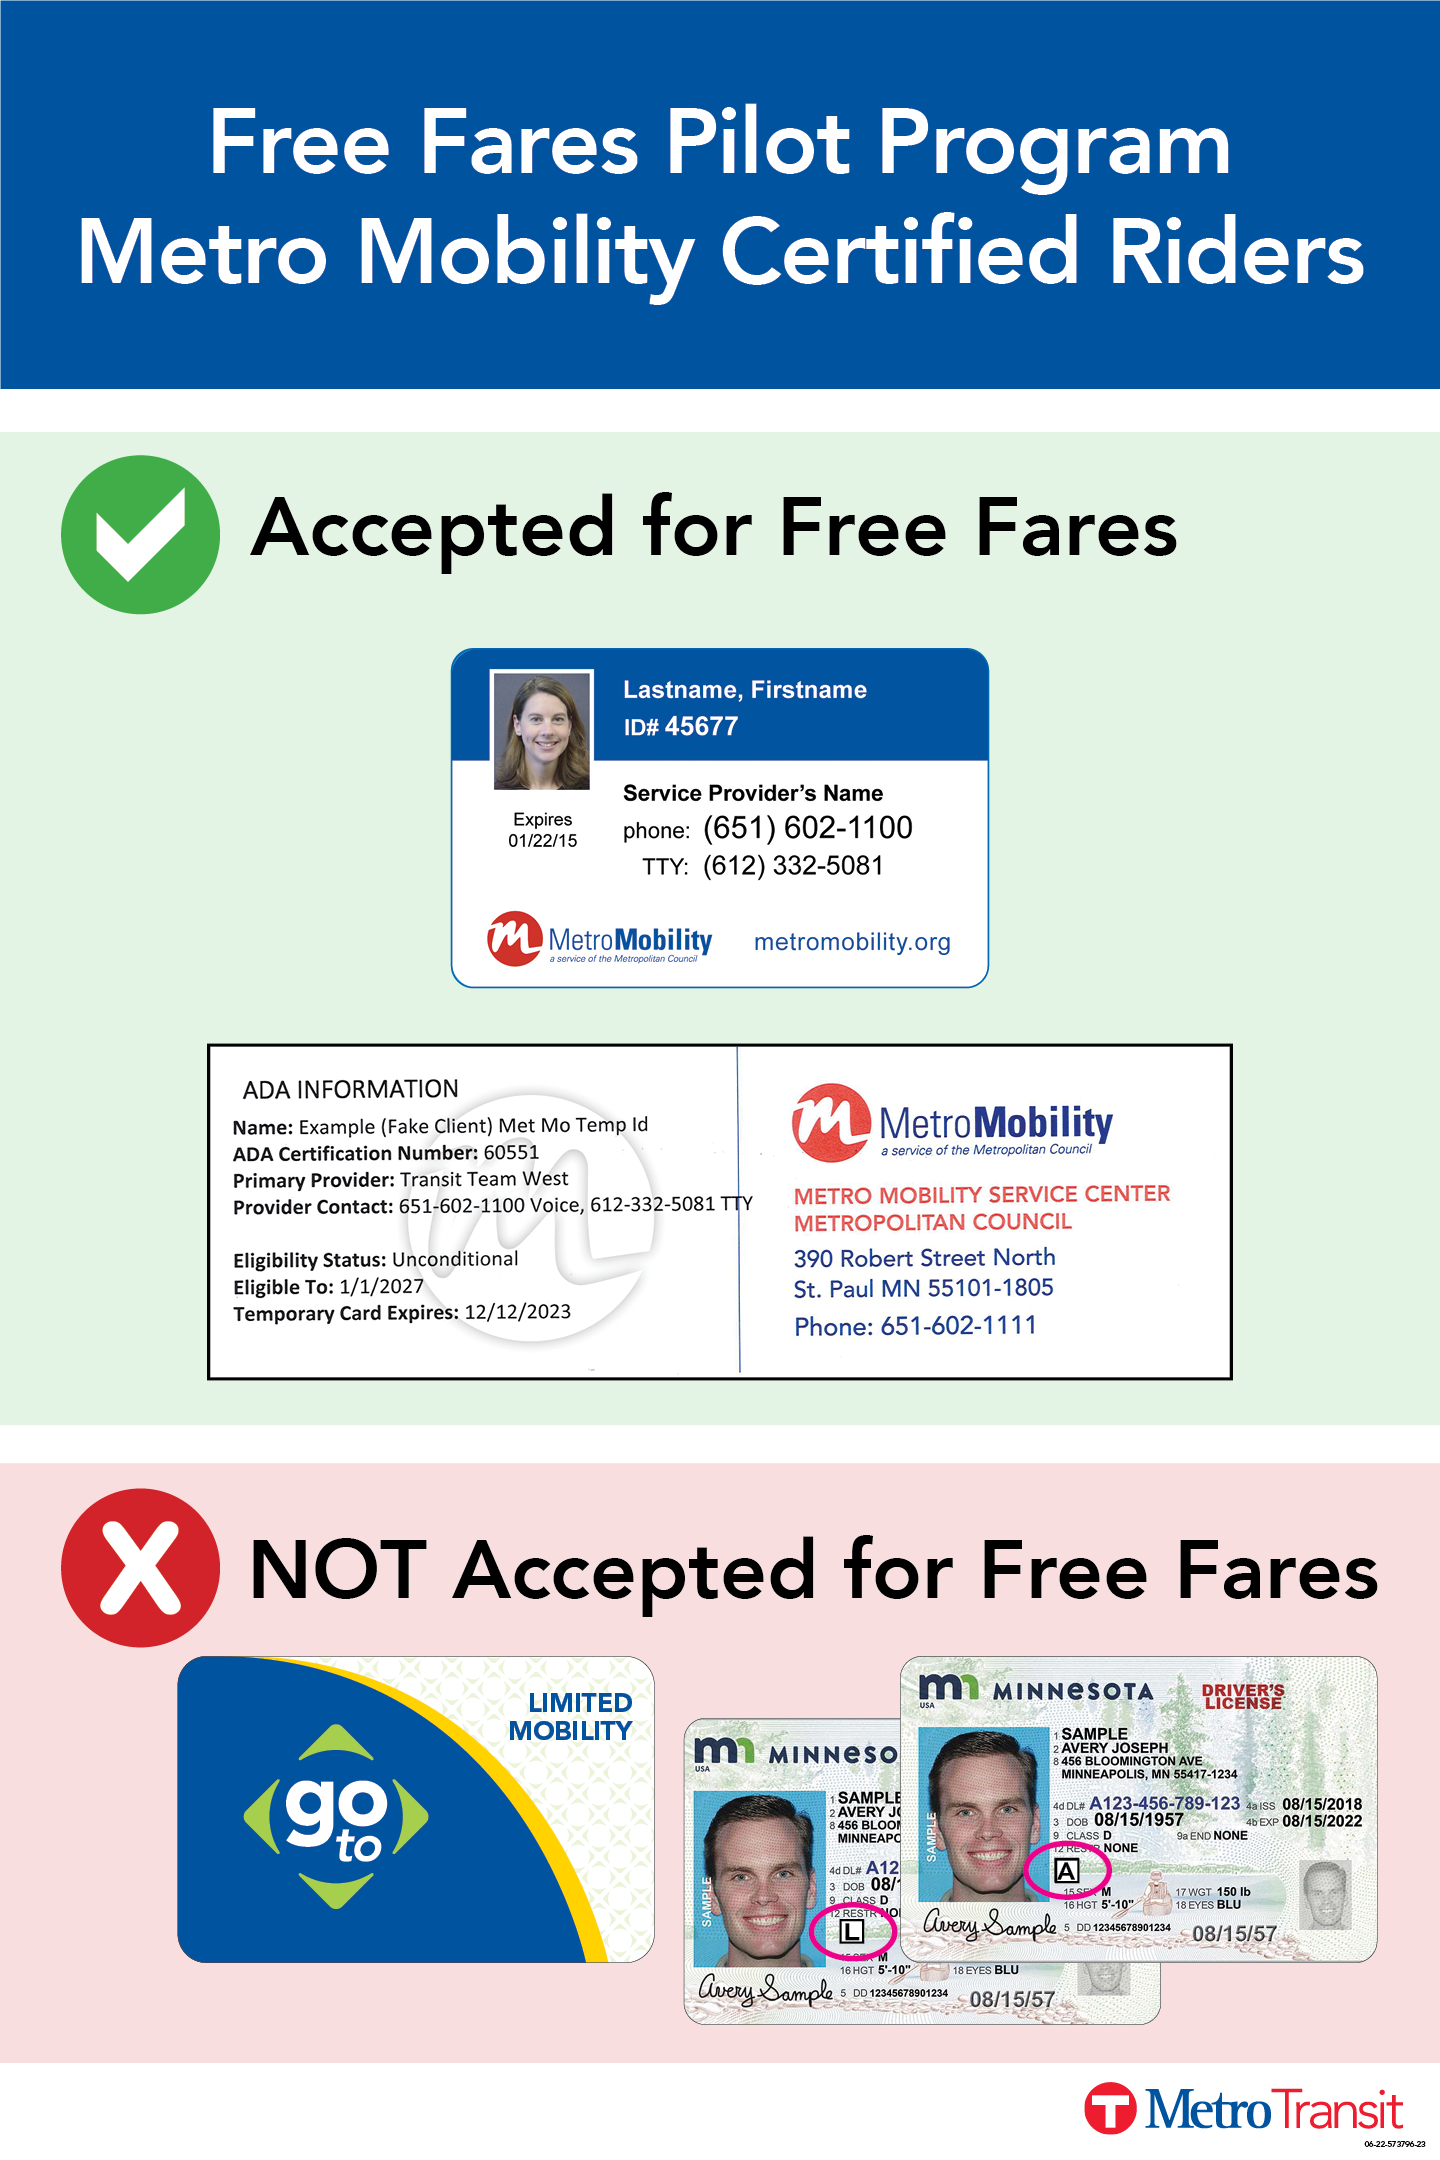 Poster showing the IDs that Metro Mobility rides must use to receive free transit rides